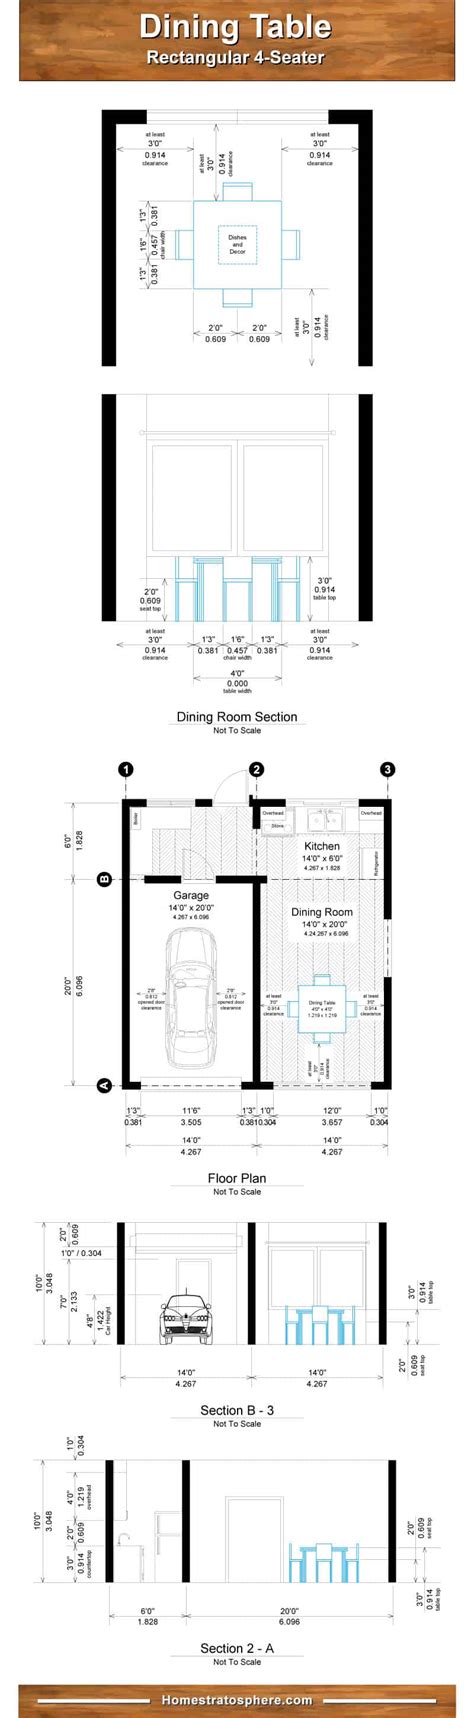 proper dining room table dimensions        people charts